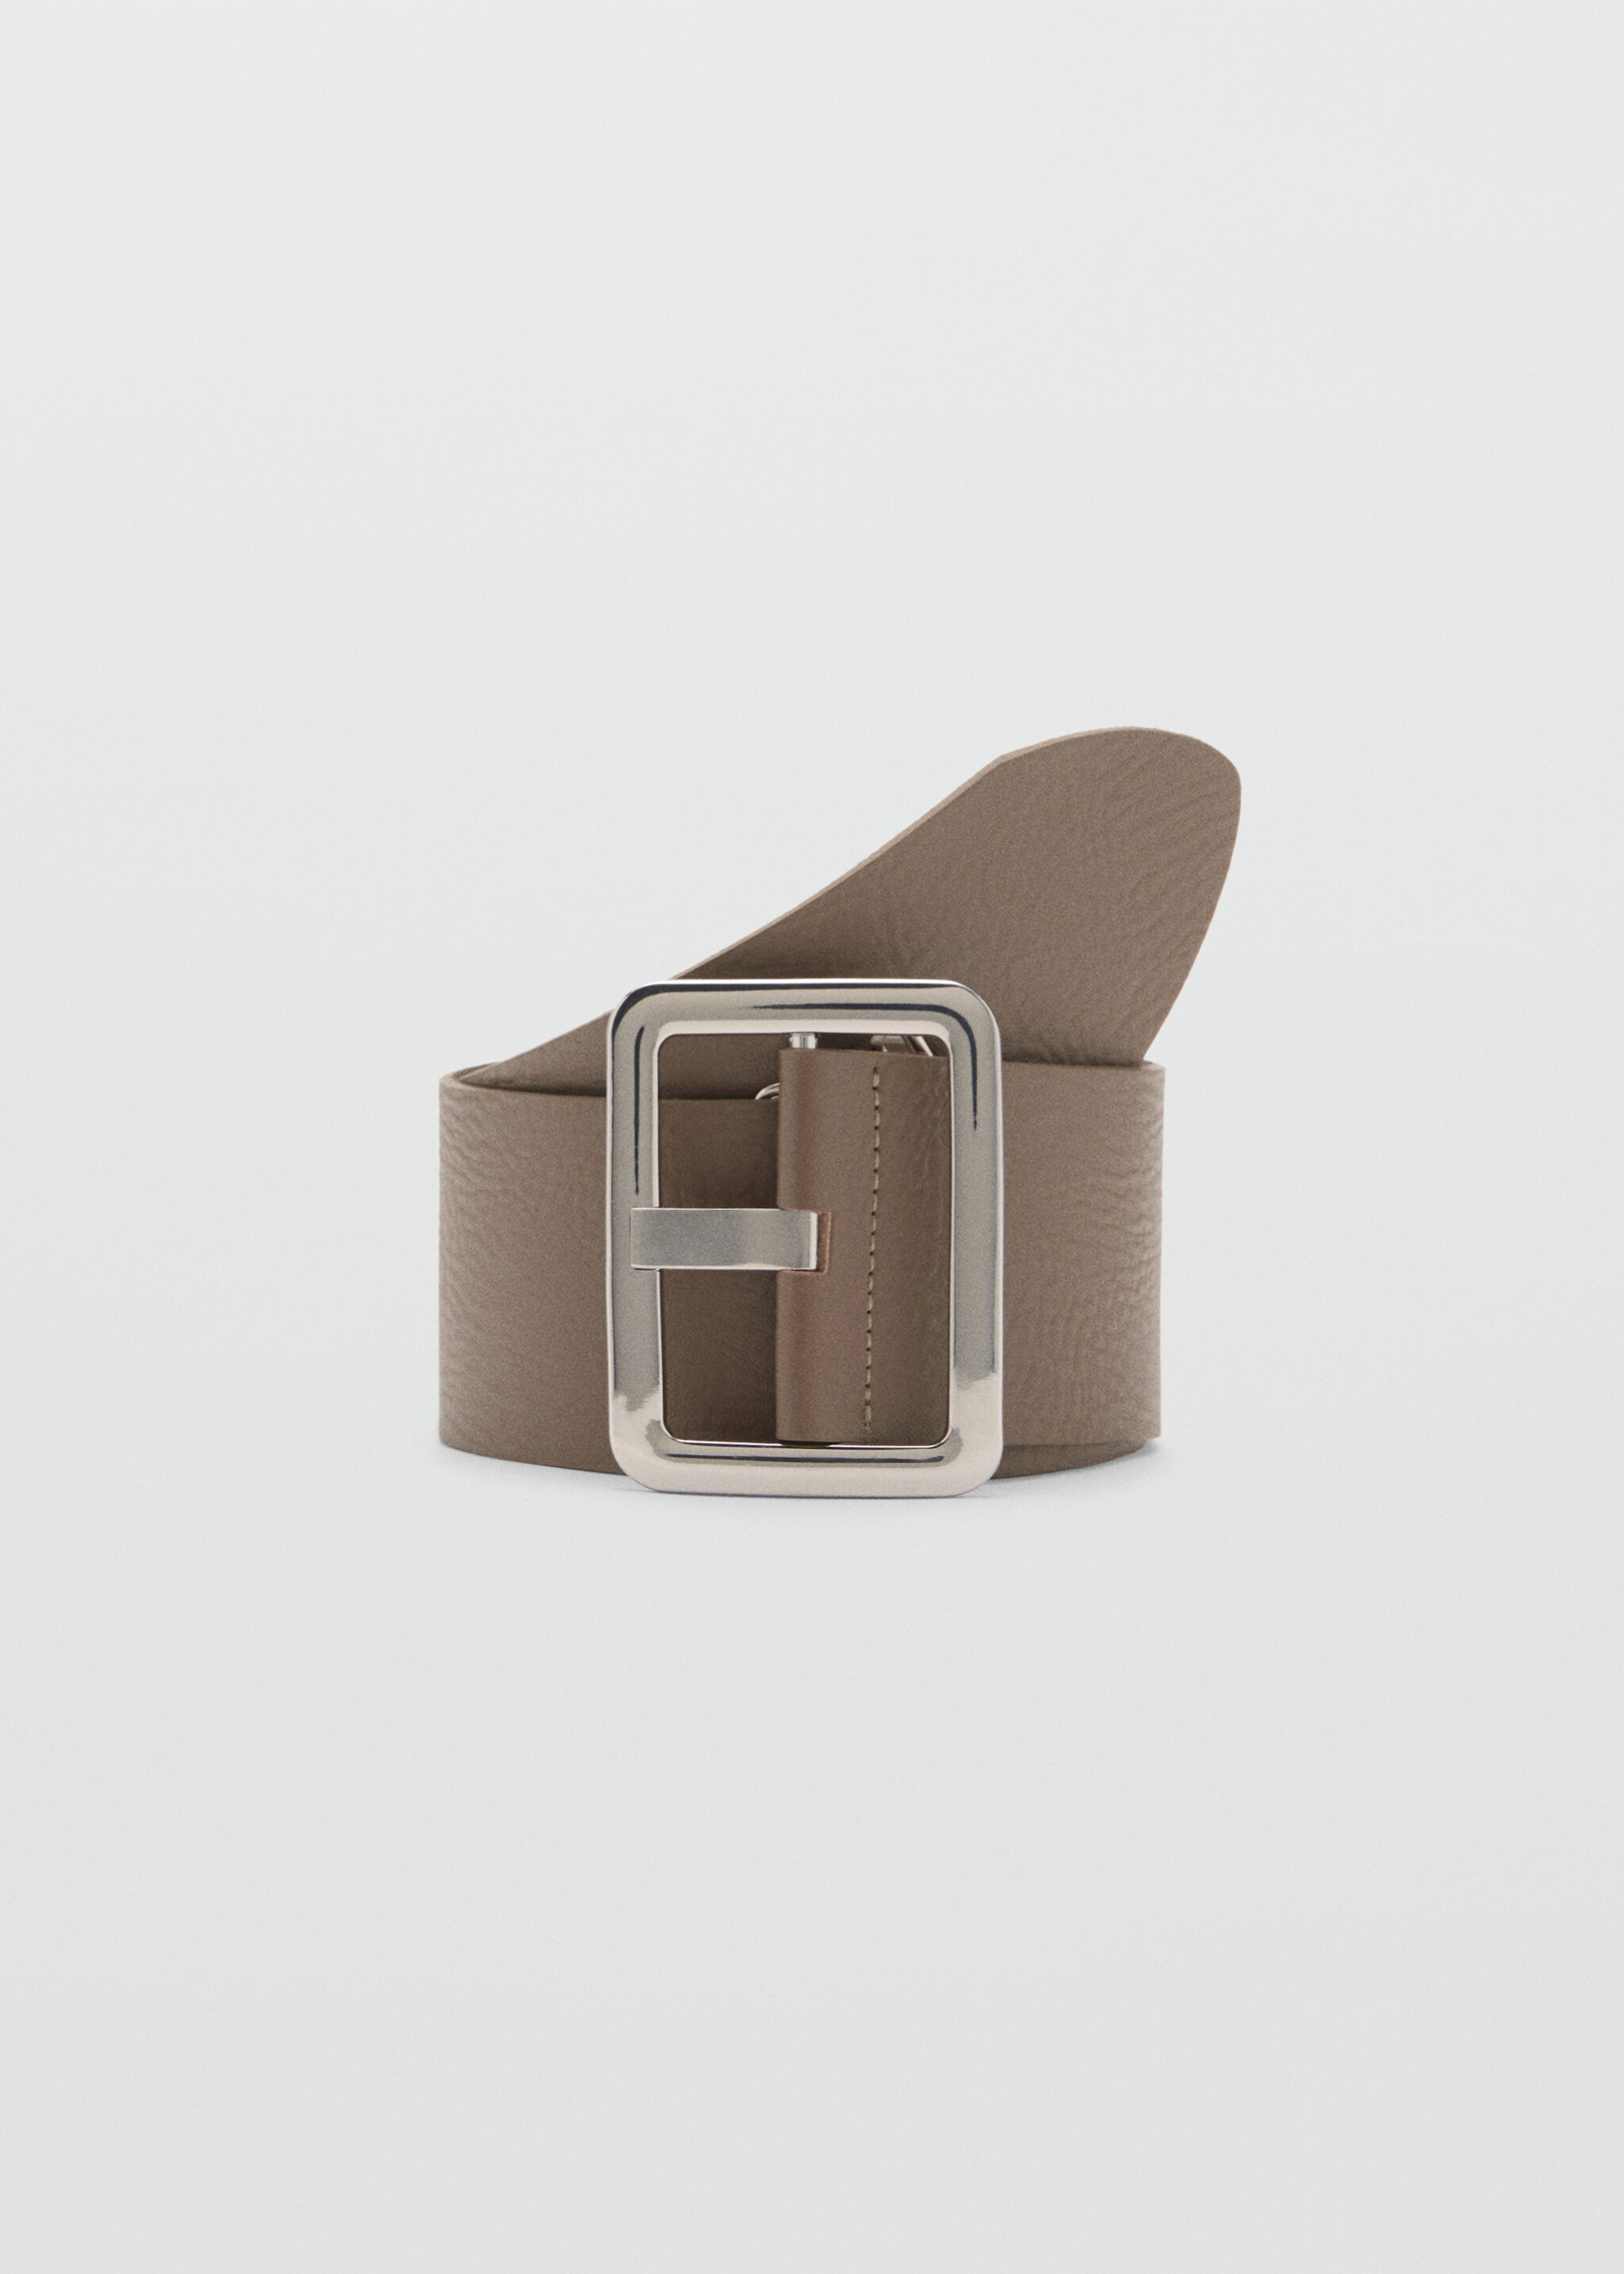 Wide leather belt - Article without model